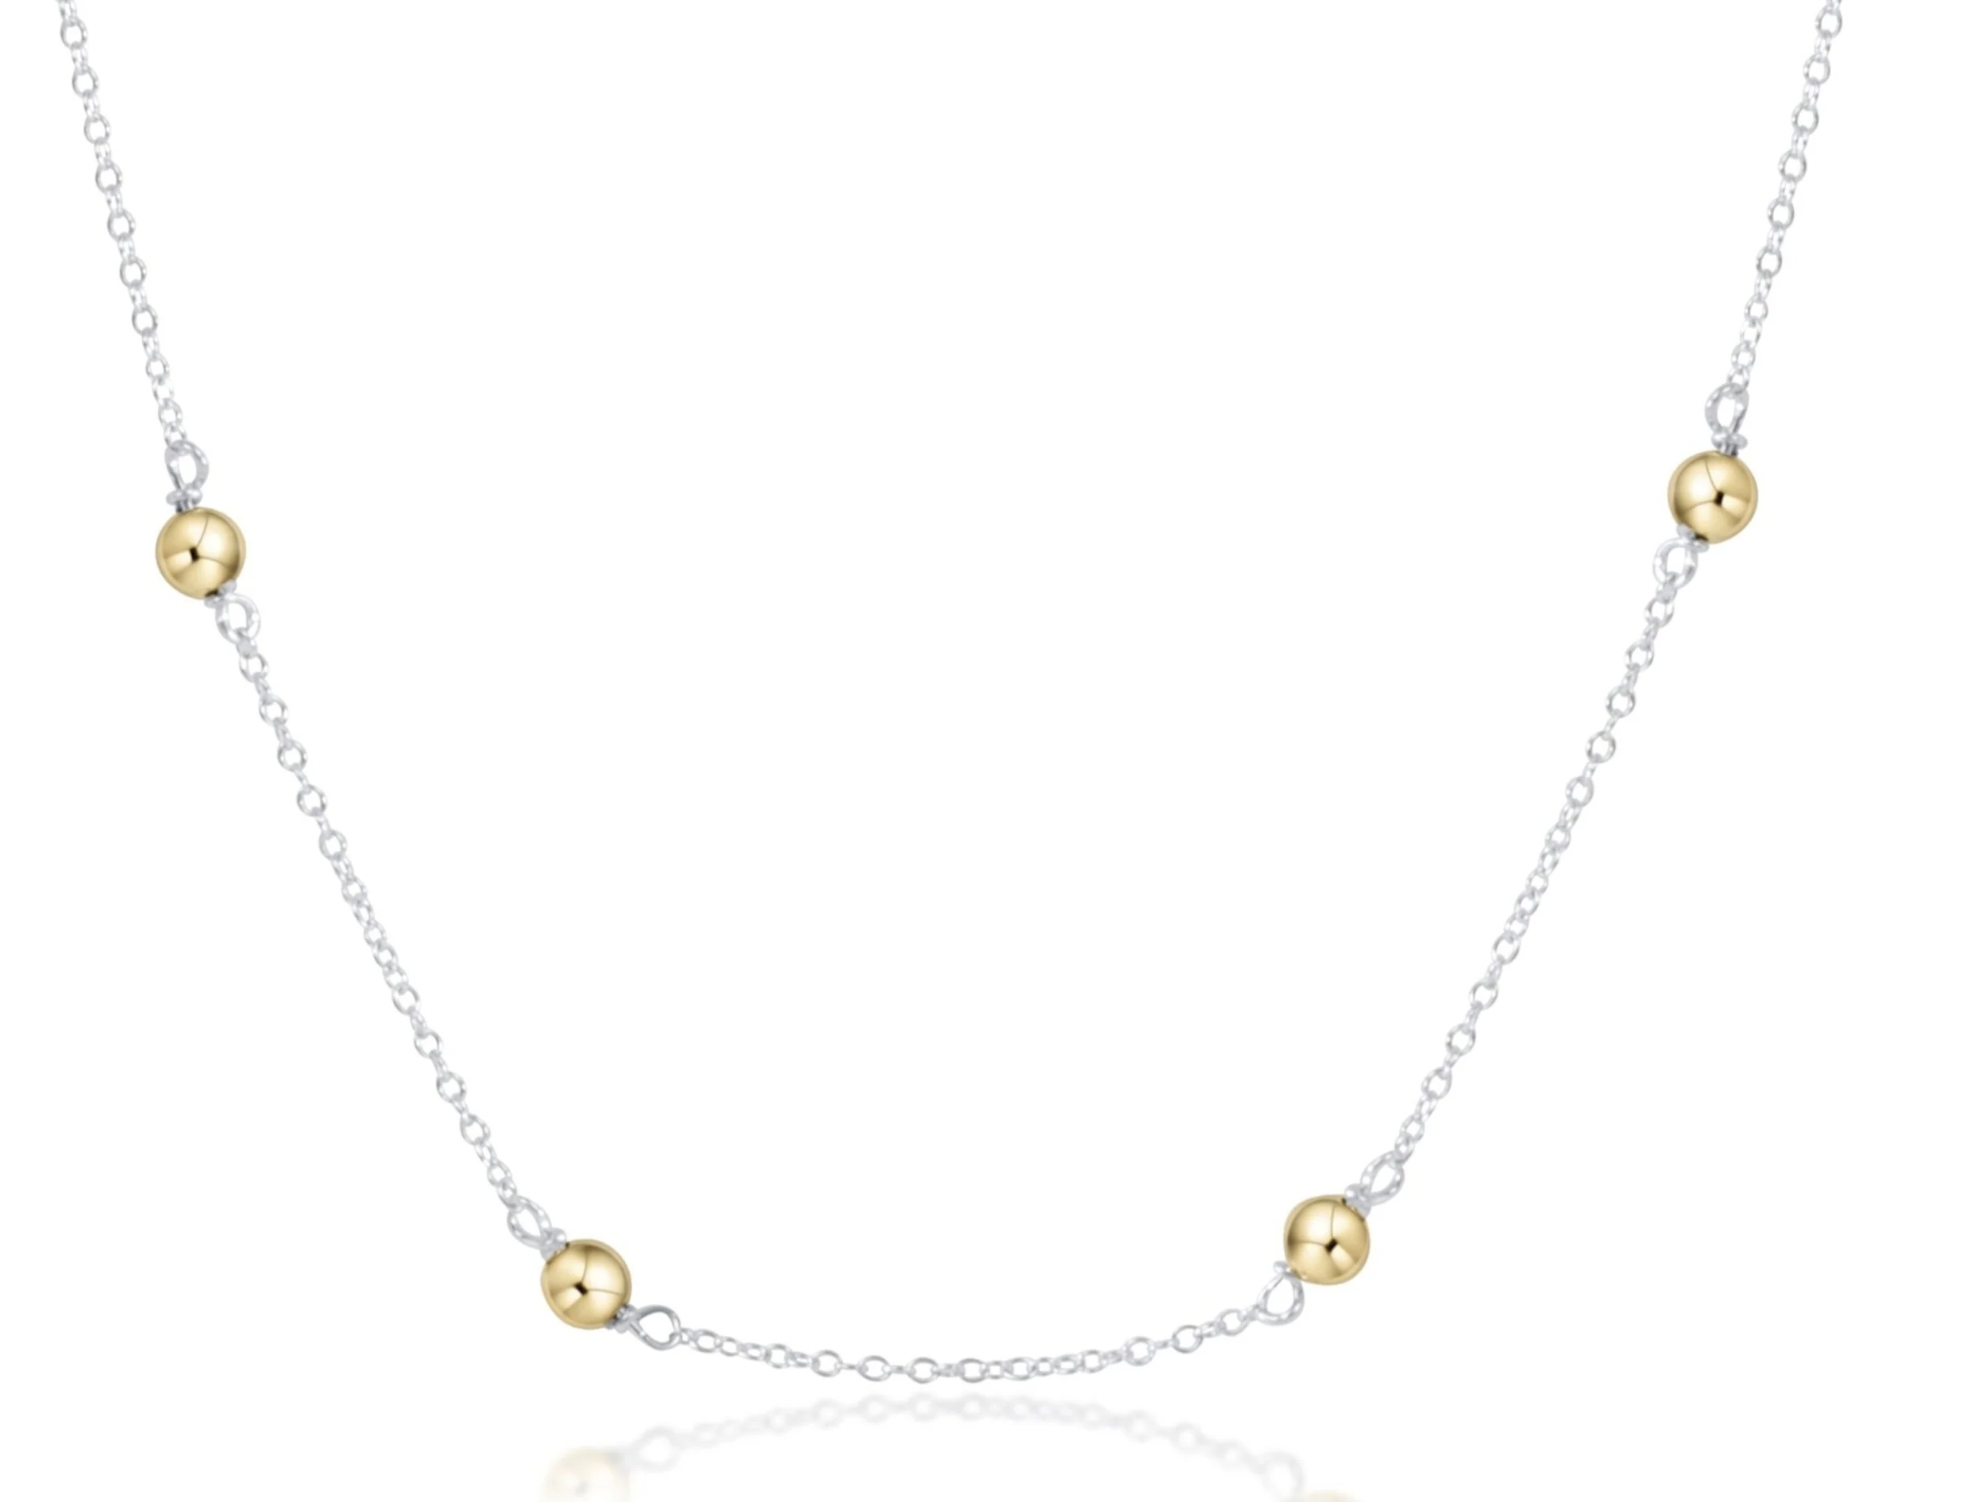 ENEWTON 15" CHOKER SIMPLICITY CHAIN STERLING MIXED METAL - CLASSIC 4MM GOLD